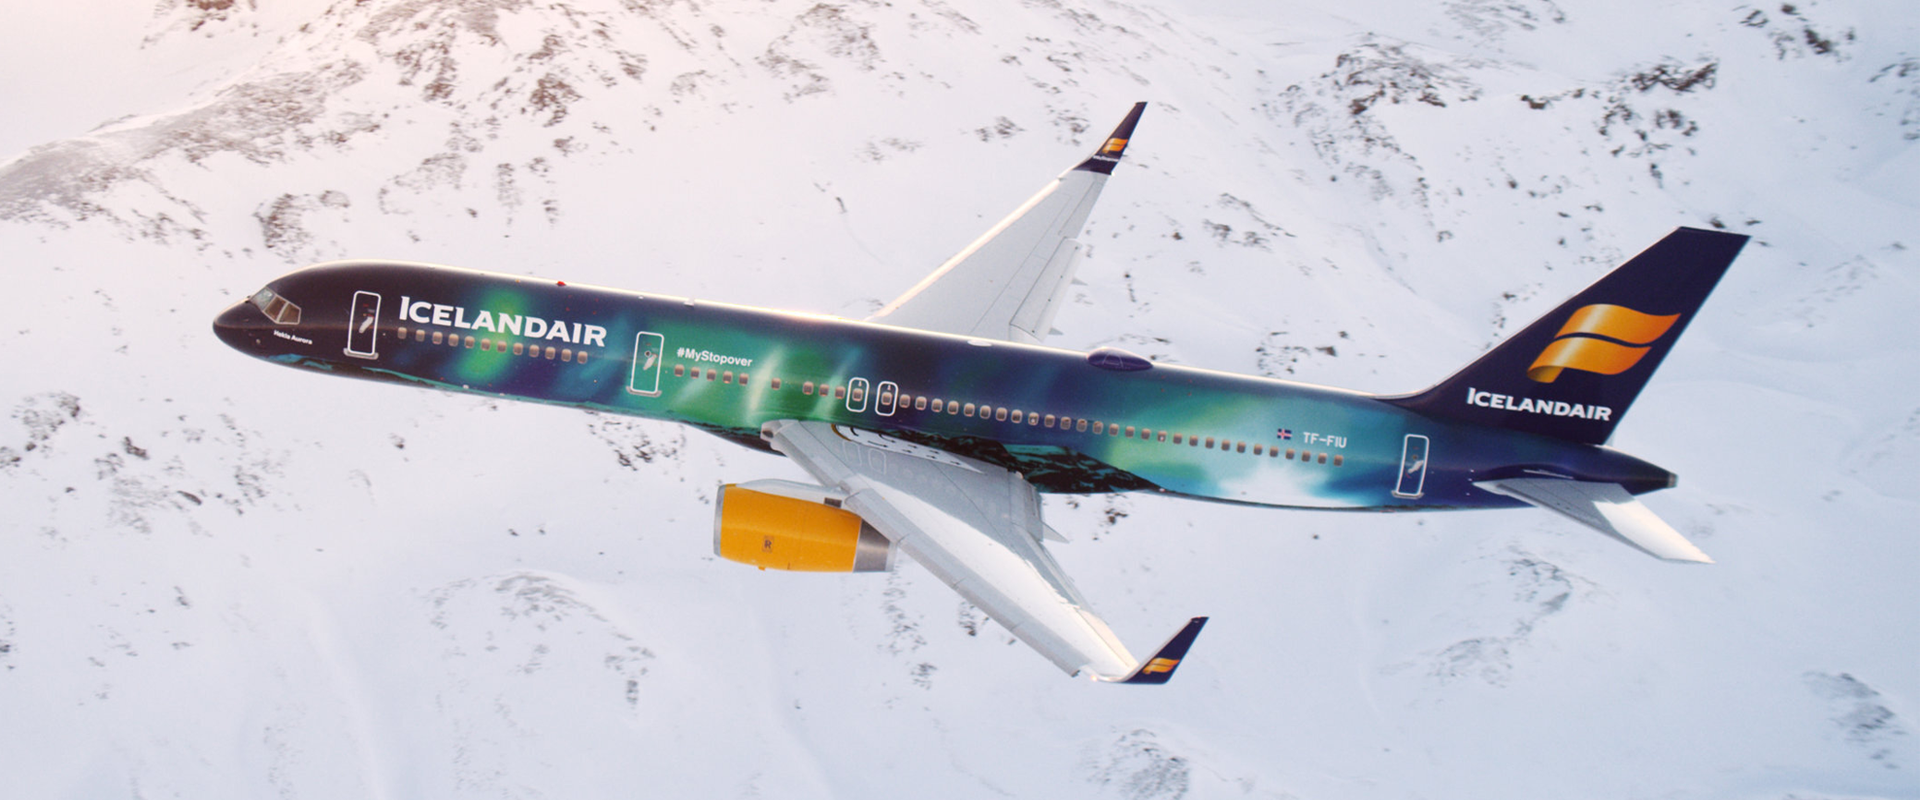 7 of the most unusual and impressive aircraft liveries, MTB Events. Image shows an Icelandair aircraft with blue and green colours painted like the northern lights along the fuselage.